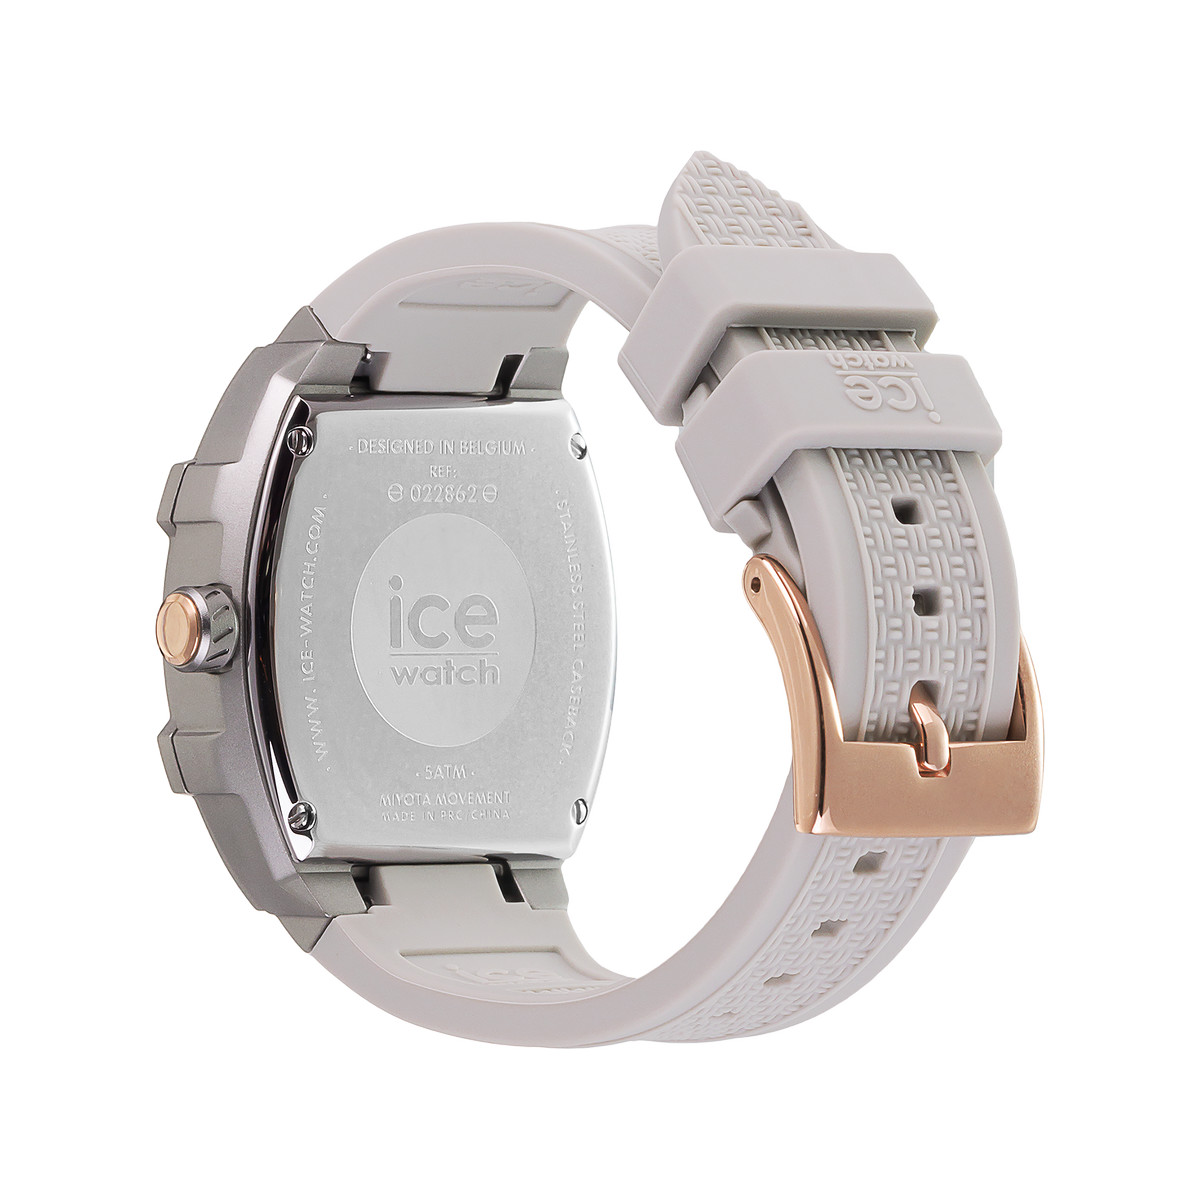 Montre ICE WATCH Ice boliday femme bracelet silicone gris - vue 3